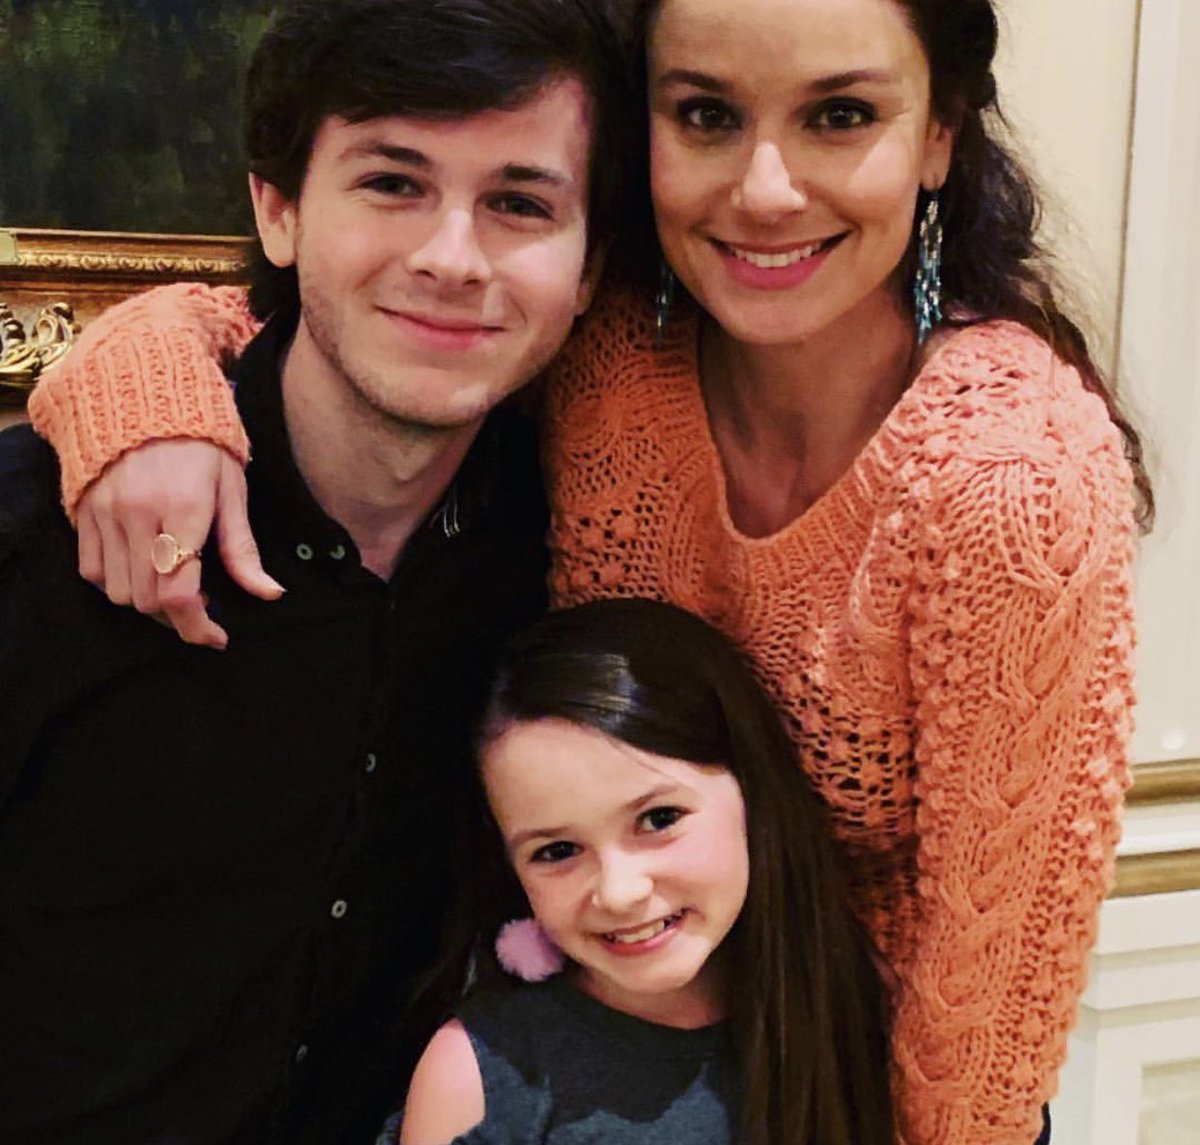 Sarah Wayne Callies, Chandler Riggs, and Cailey Fleming together for a family picture!
#TWDFamily #TheWalkingDead
(📸: sarahwaynecallies IG)